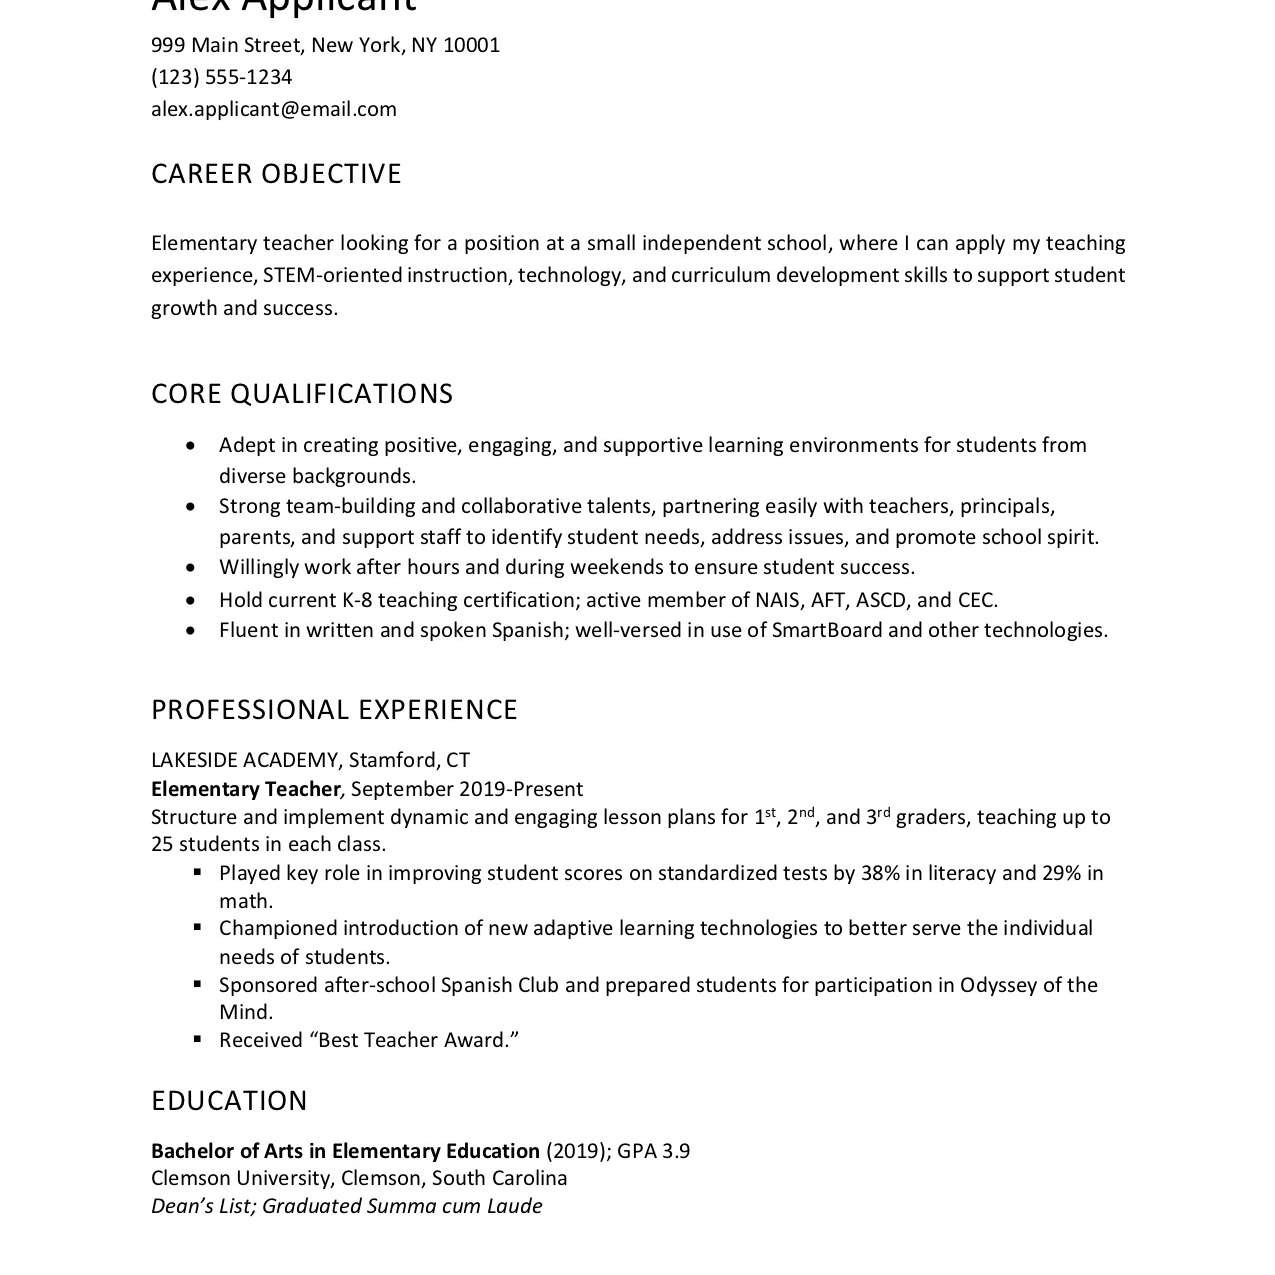 Sample Resume Objective for Teaching Profession Resume Objective Examples and Writing Tips